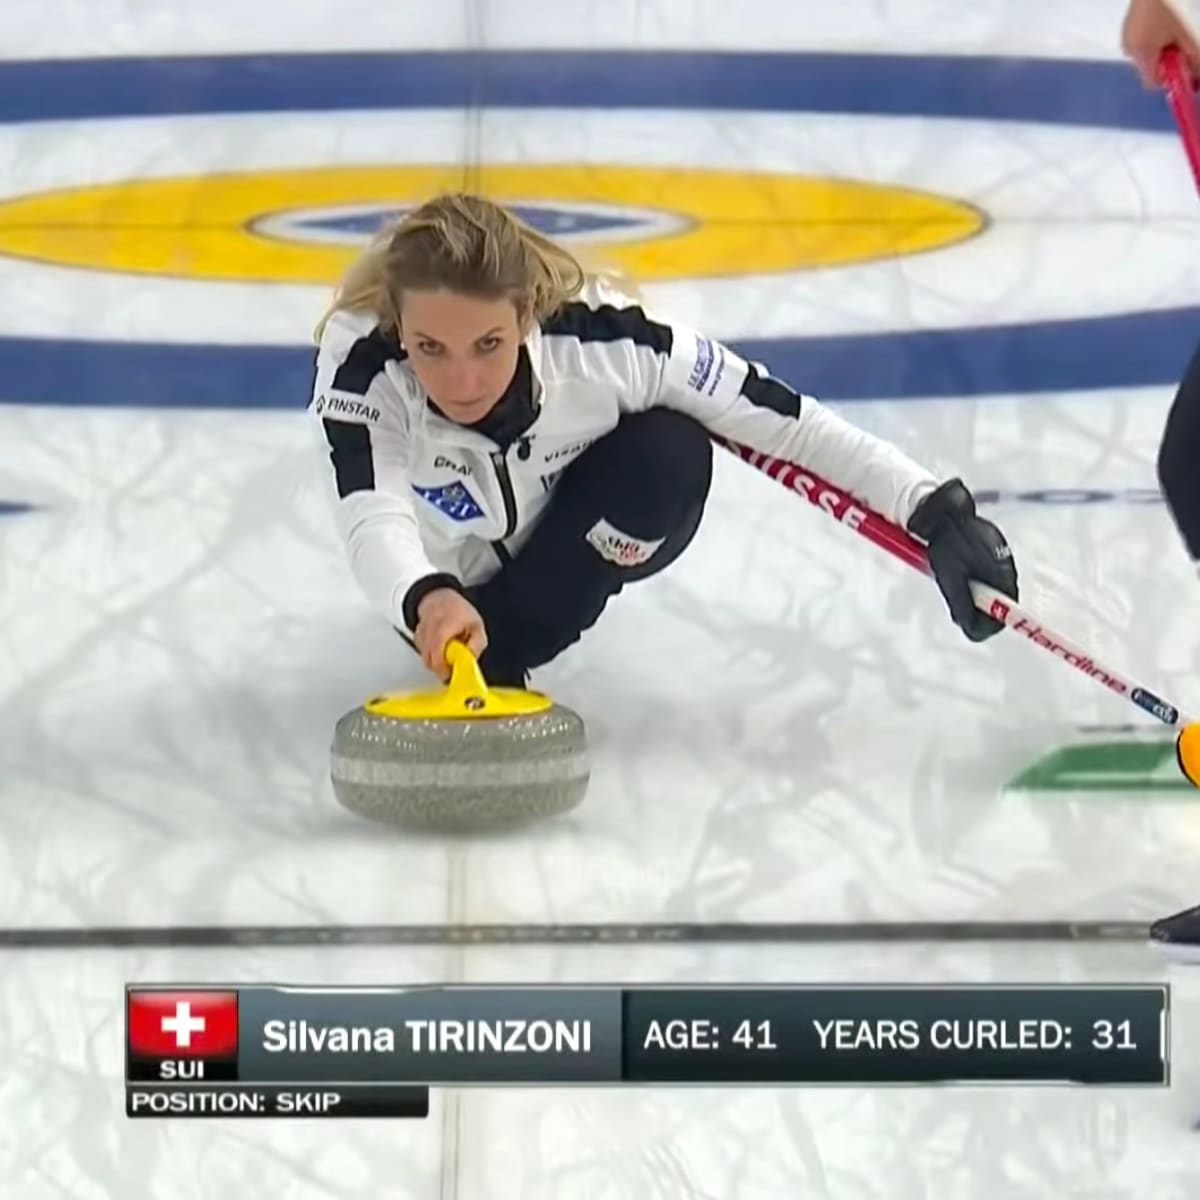 Some Fans Are Clueless About World Curling YouTube Games